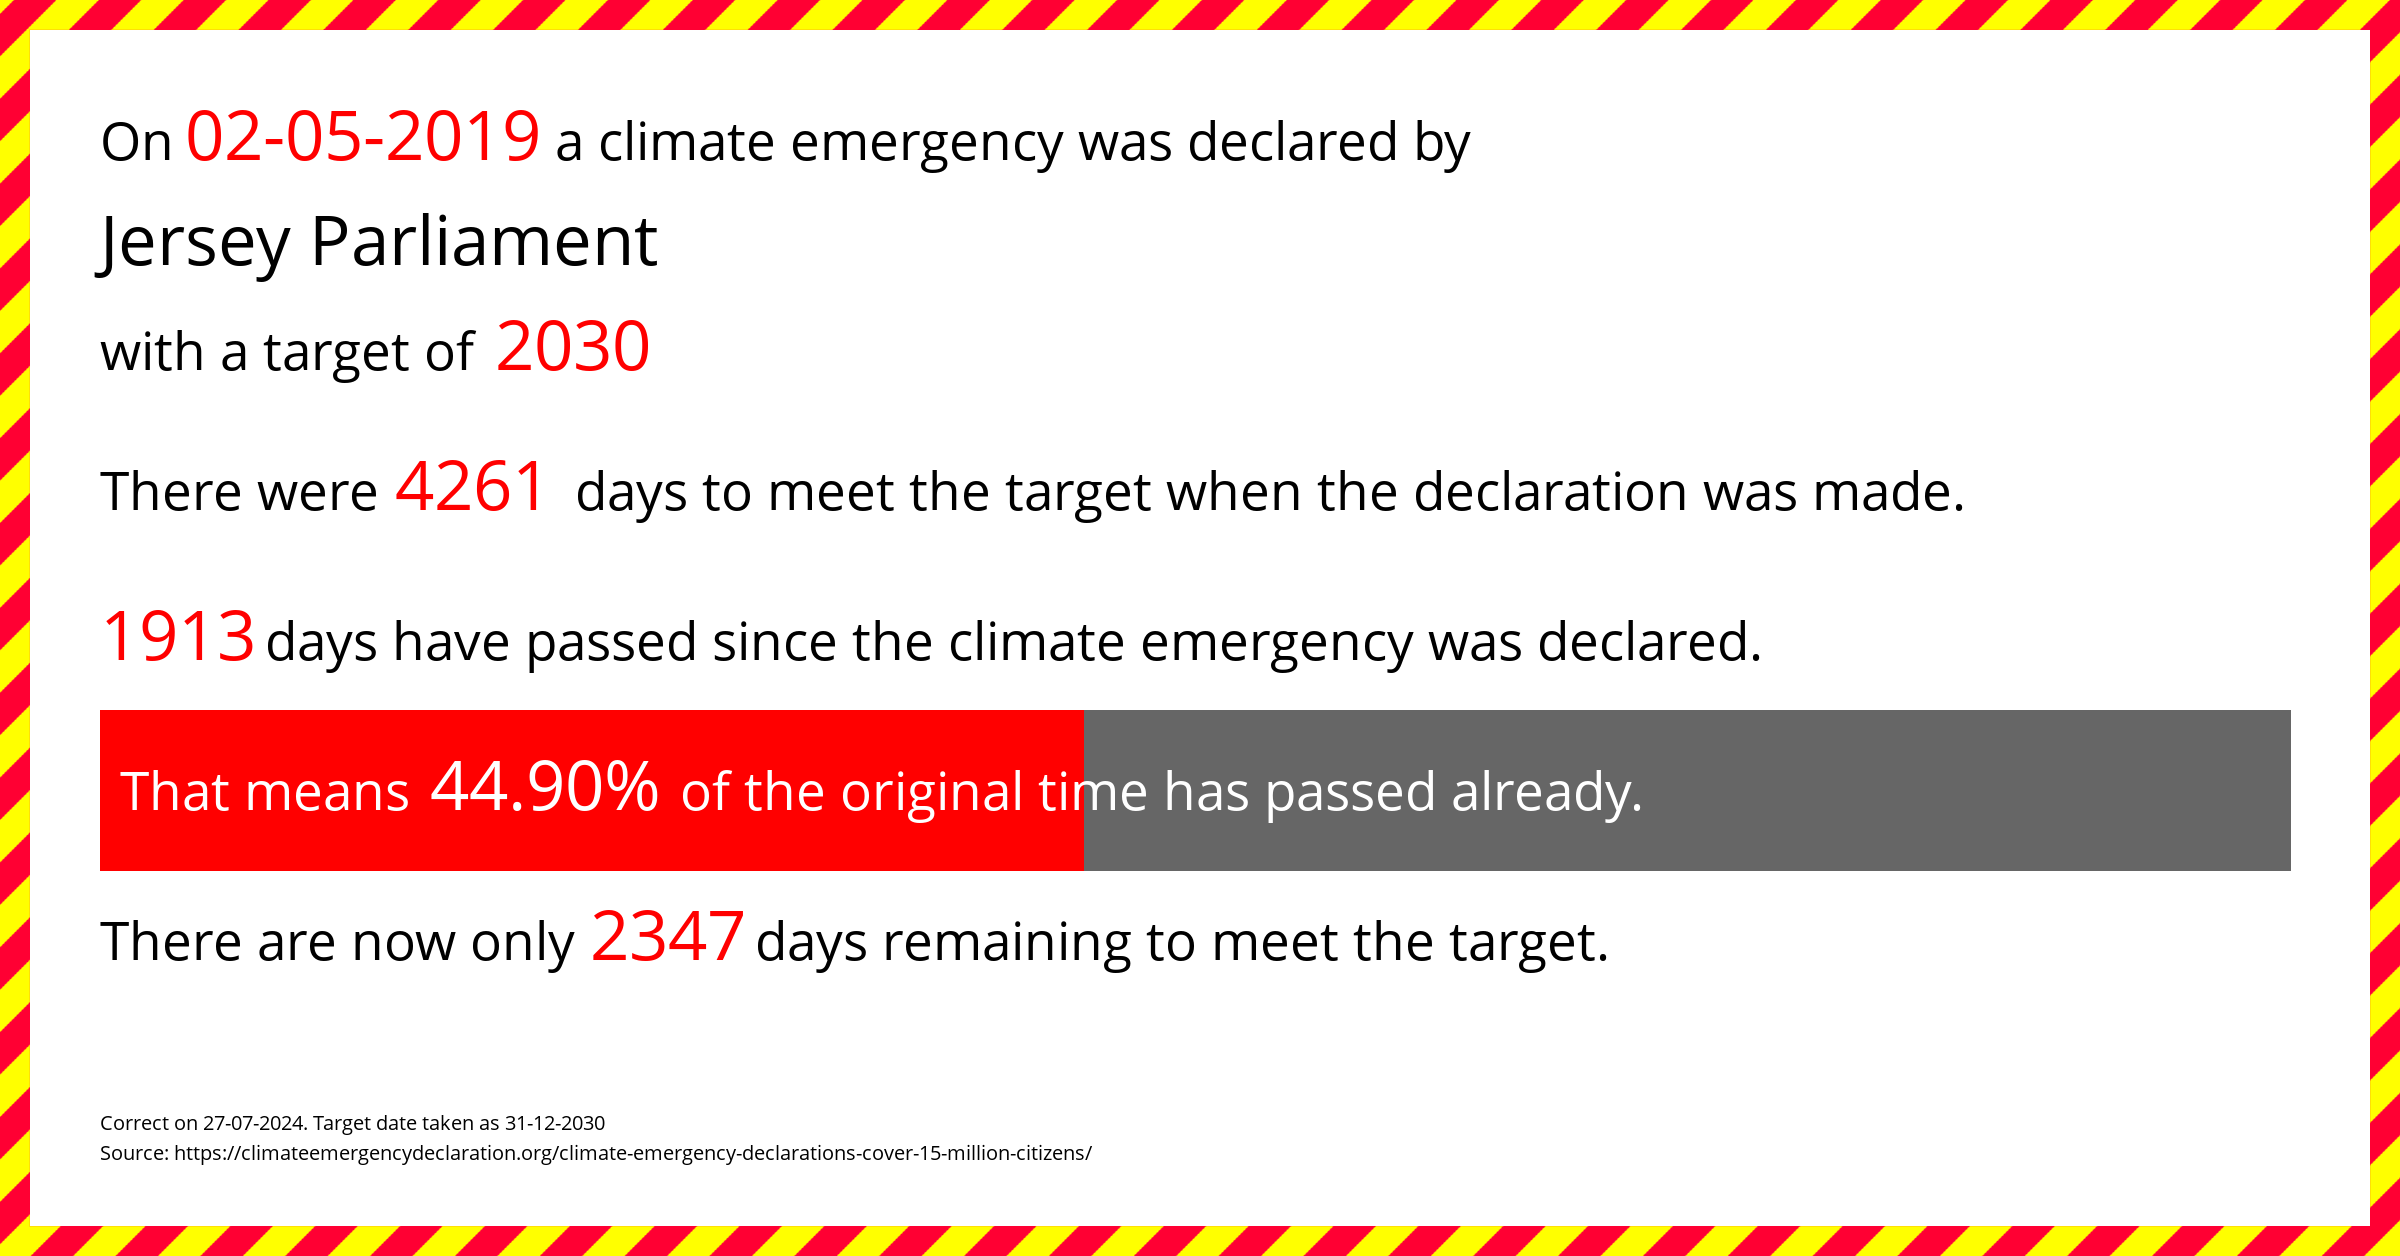 Jersey Parliament declared a Climate emergency on Thursday 2nd May 2019, with a target of 2030.